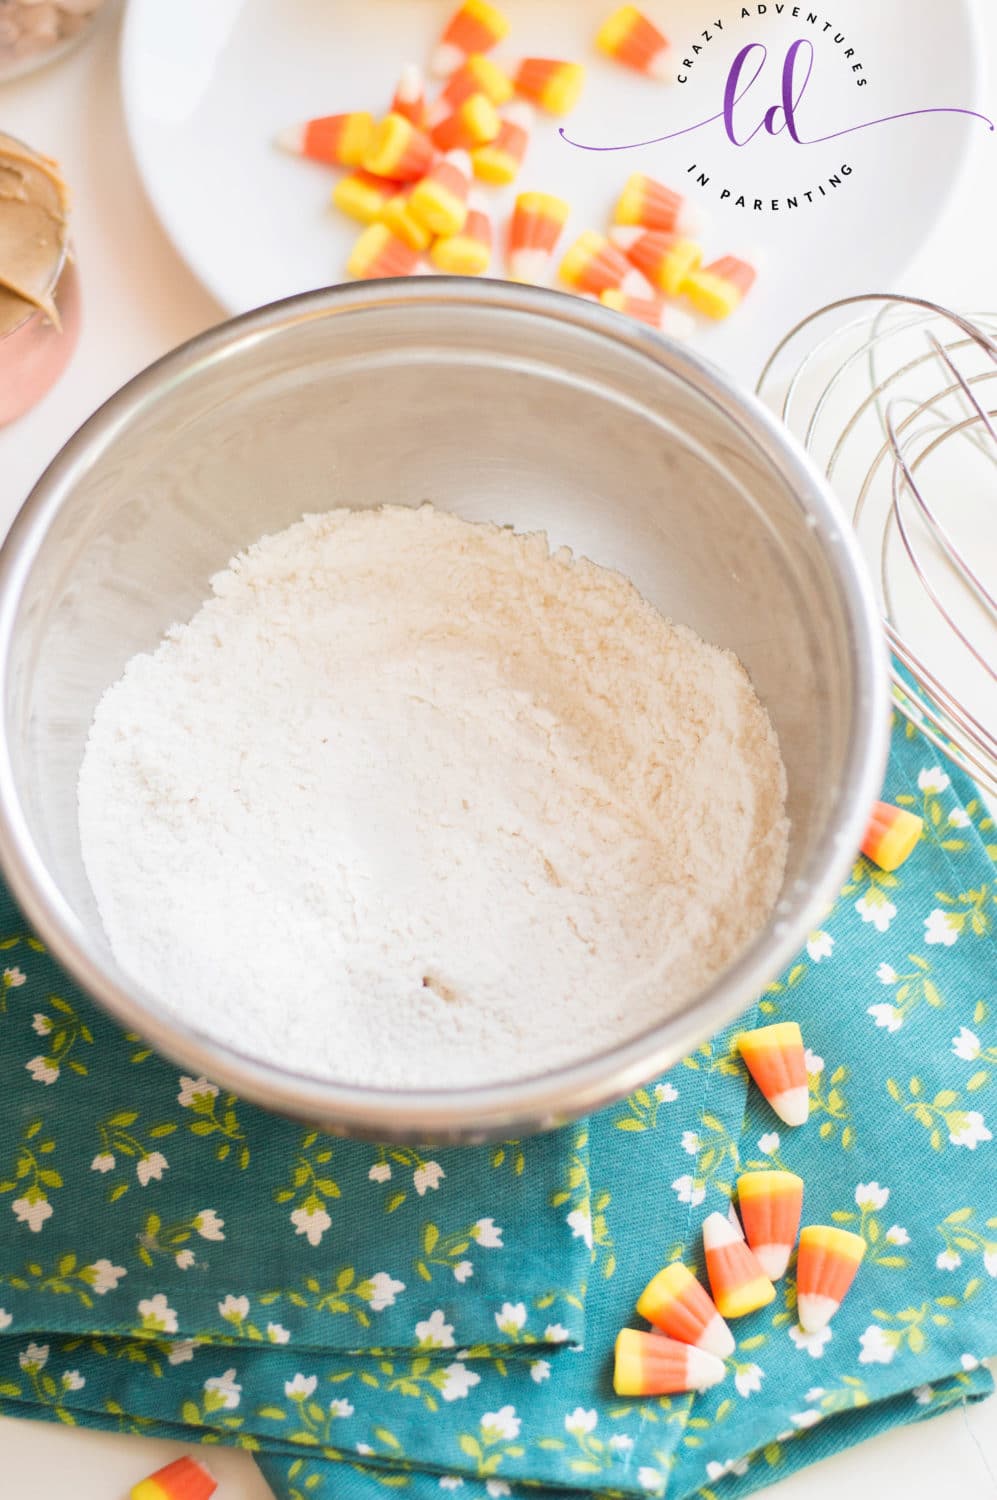 Sifted Dry Ingredients to Make Candy Corn Peanut Butter Cookies